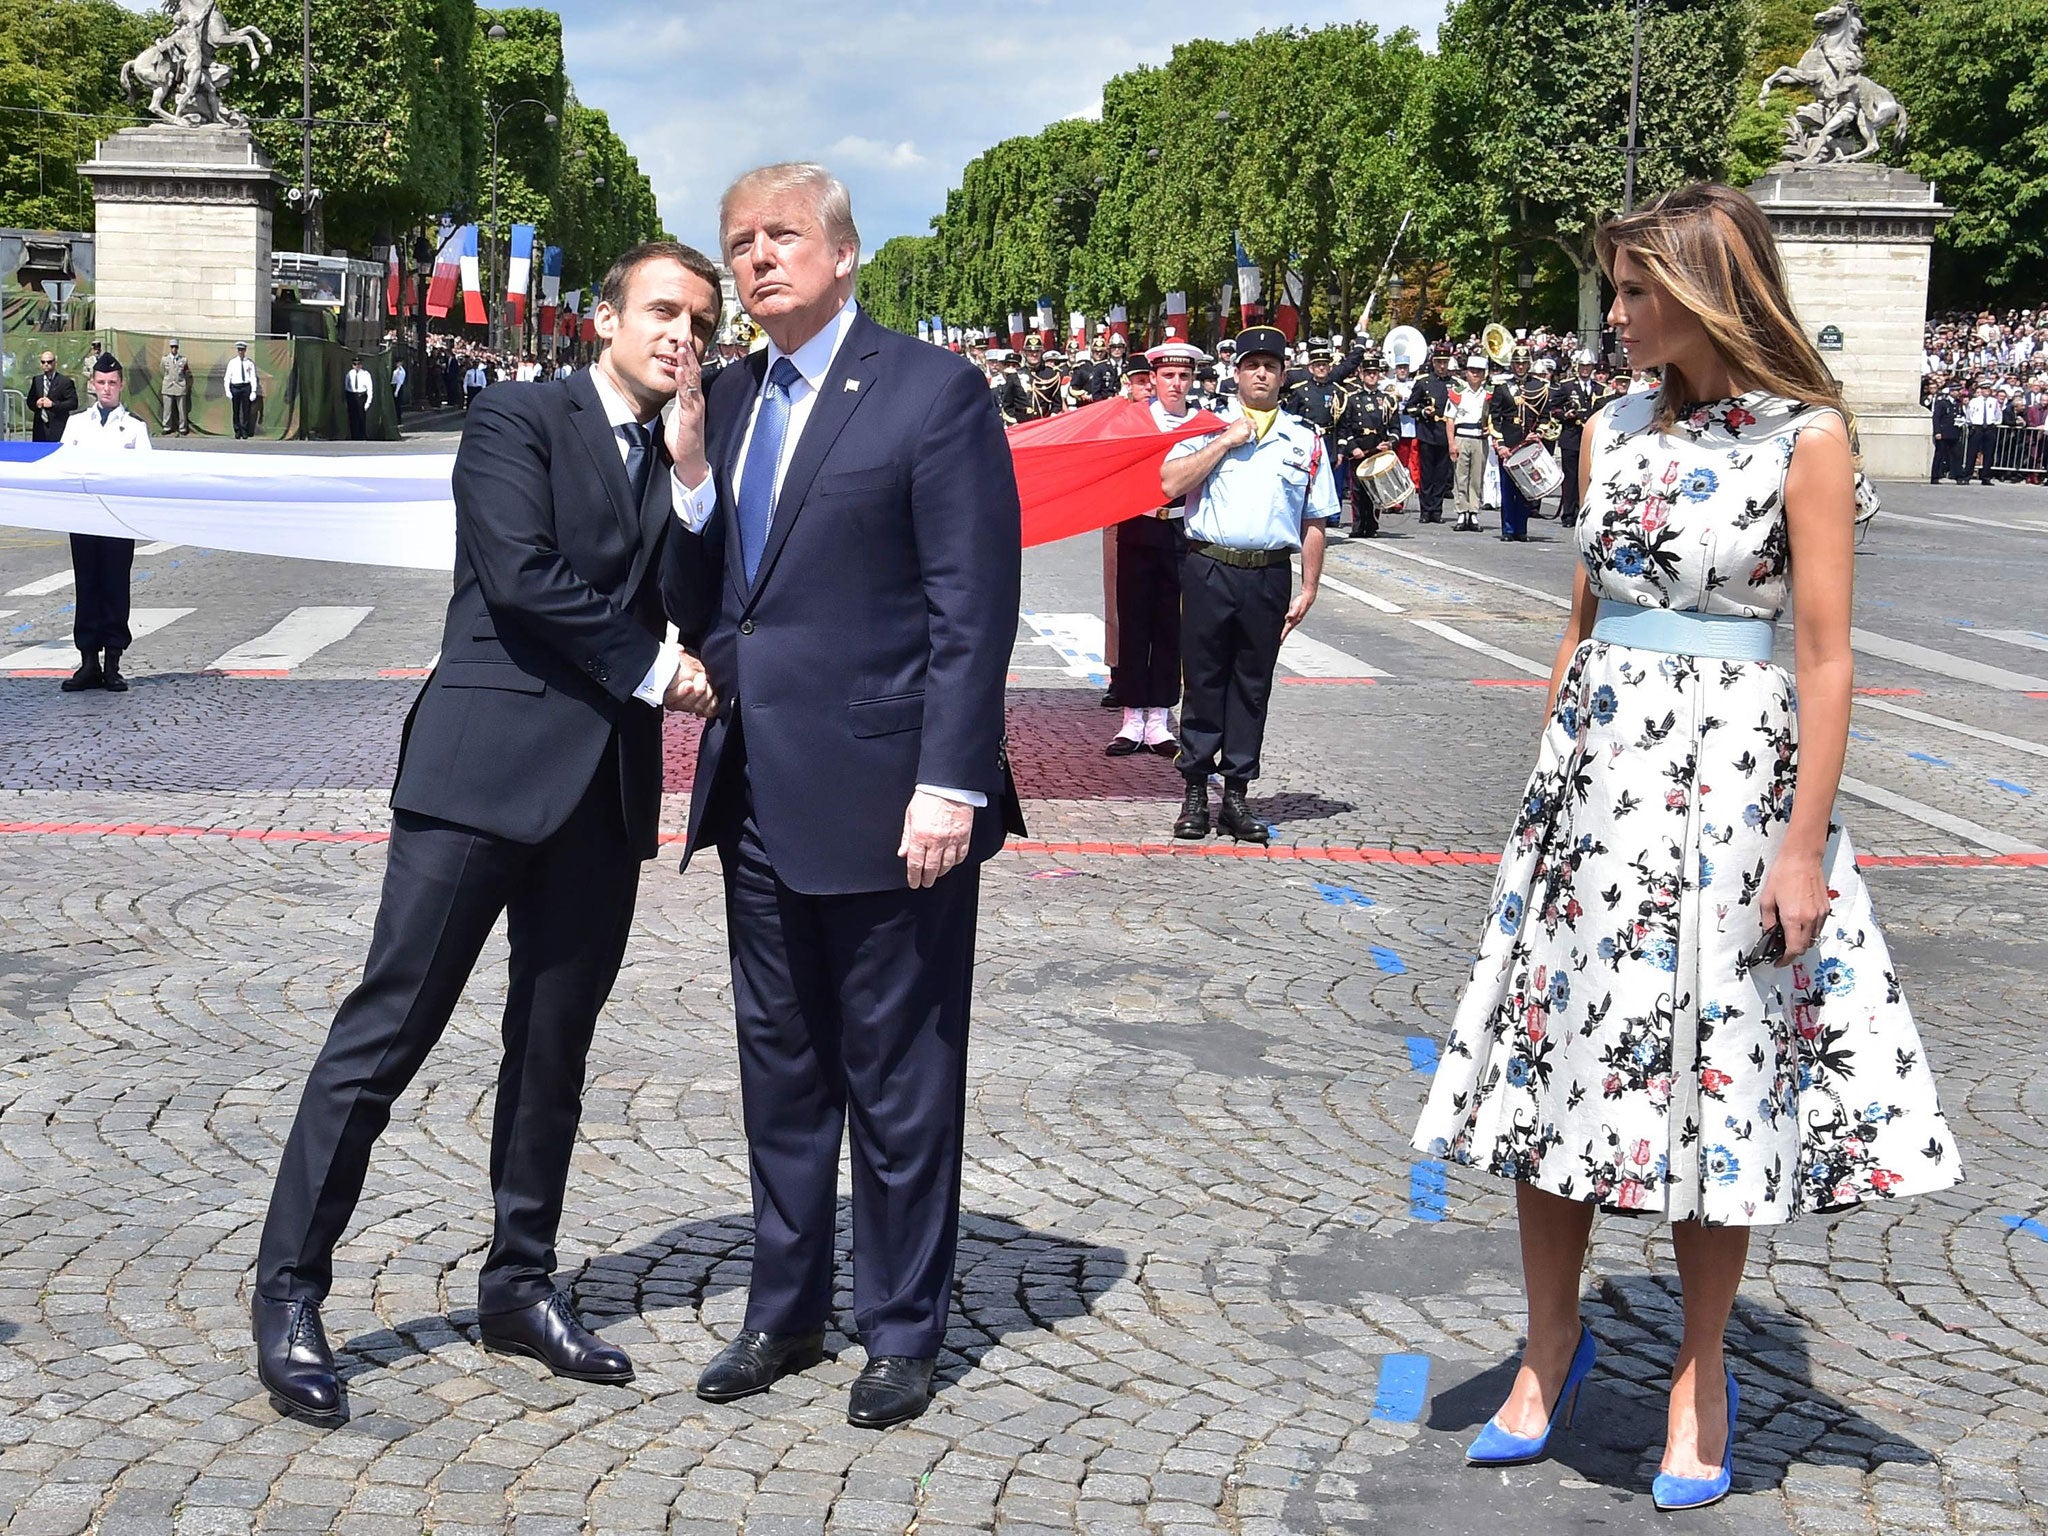 Emmanuel Macron, the French President, shakes hands with Donald Trump, the President of the United States, next to Melania Trump, the First Lady of the US, during the annual Bastille Day military parade on the Champs-Elysees